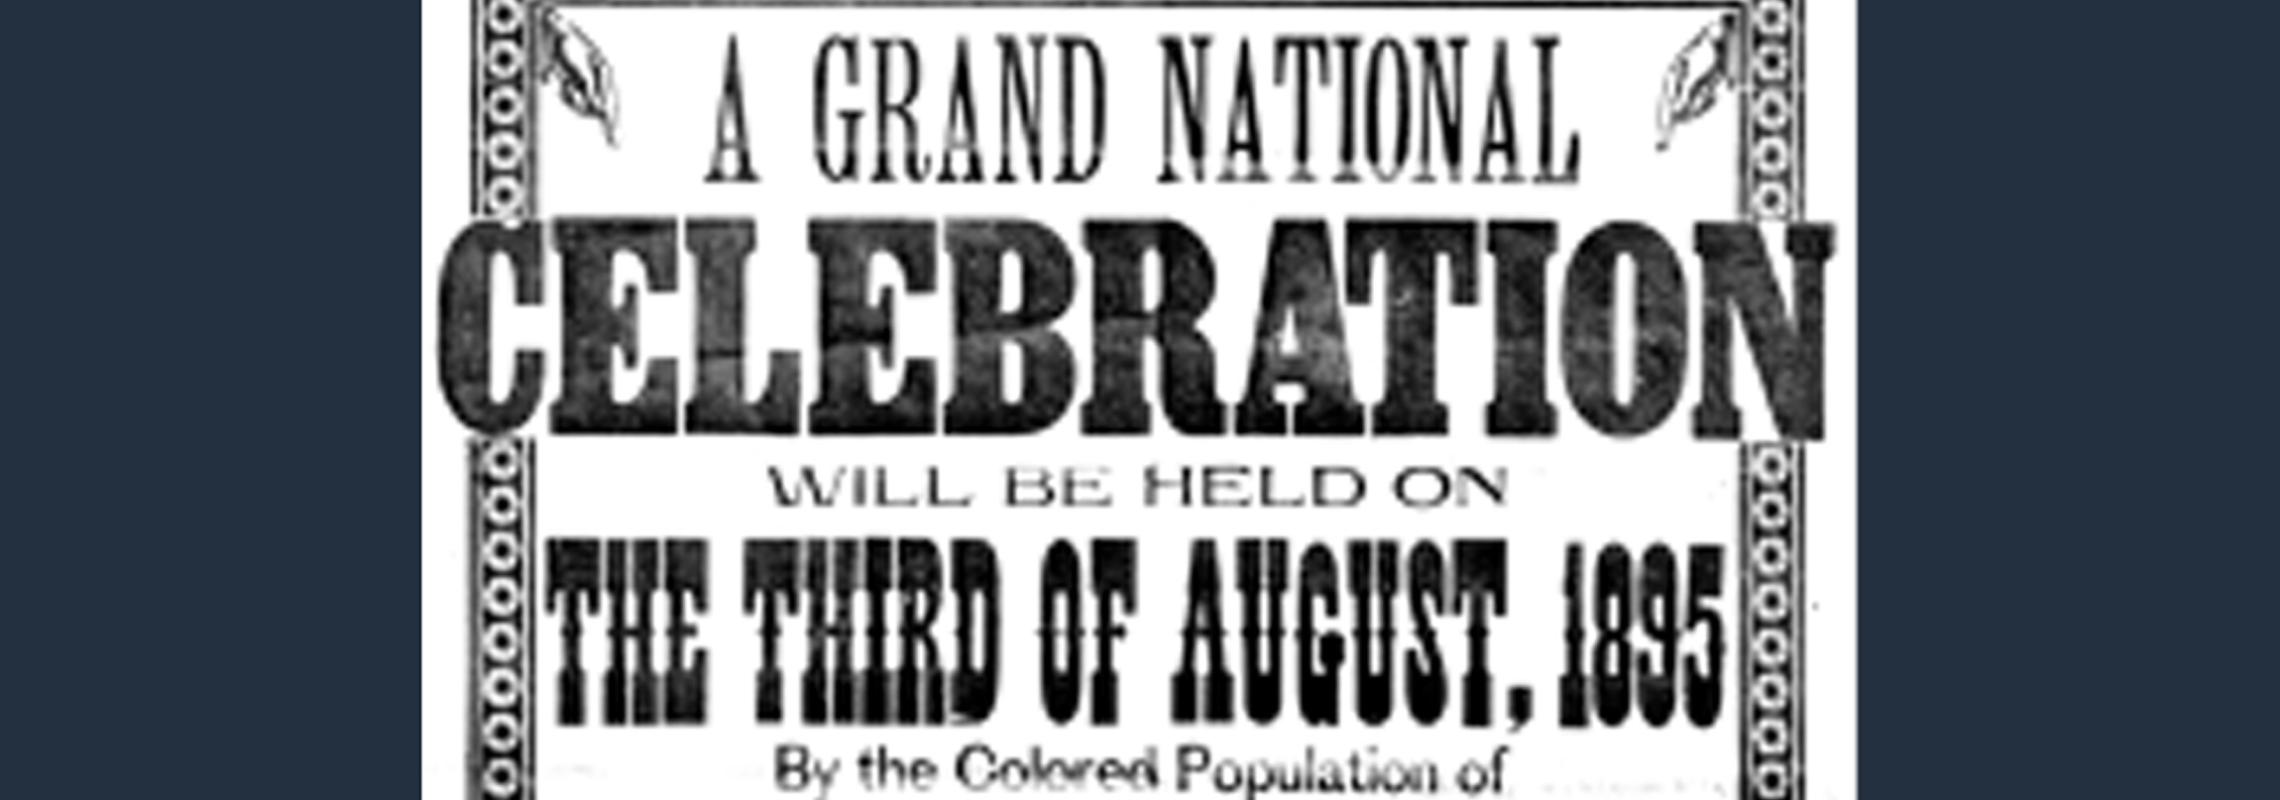 An announcement of an emancipation day event from 1895. In large print, it reads "A grand national celebration will be held on the third of August 1895"